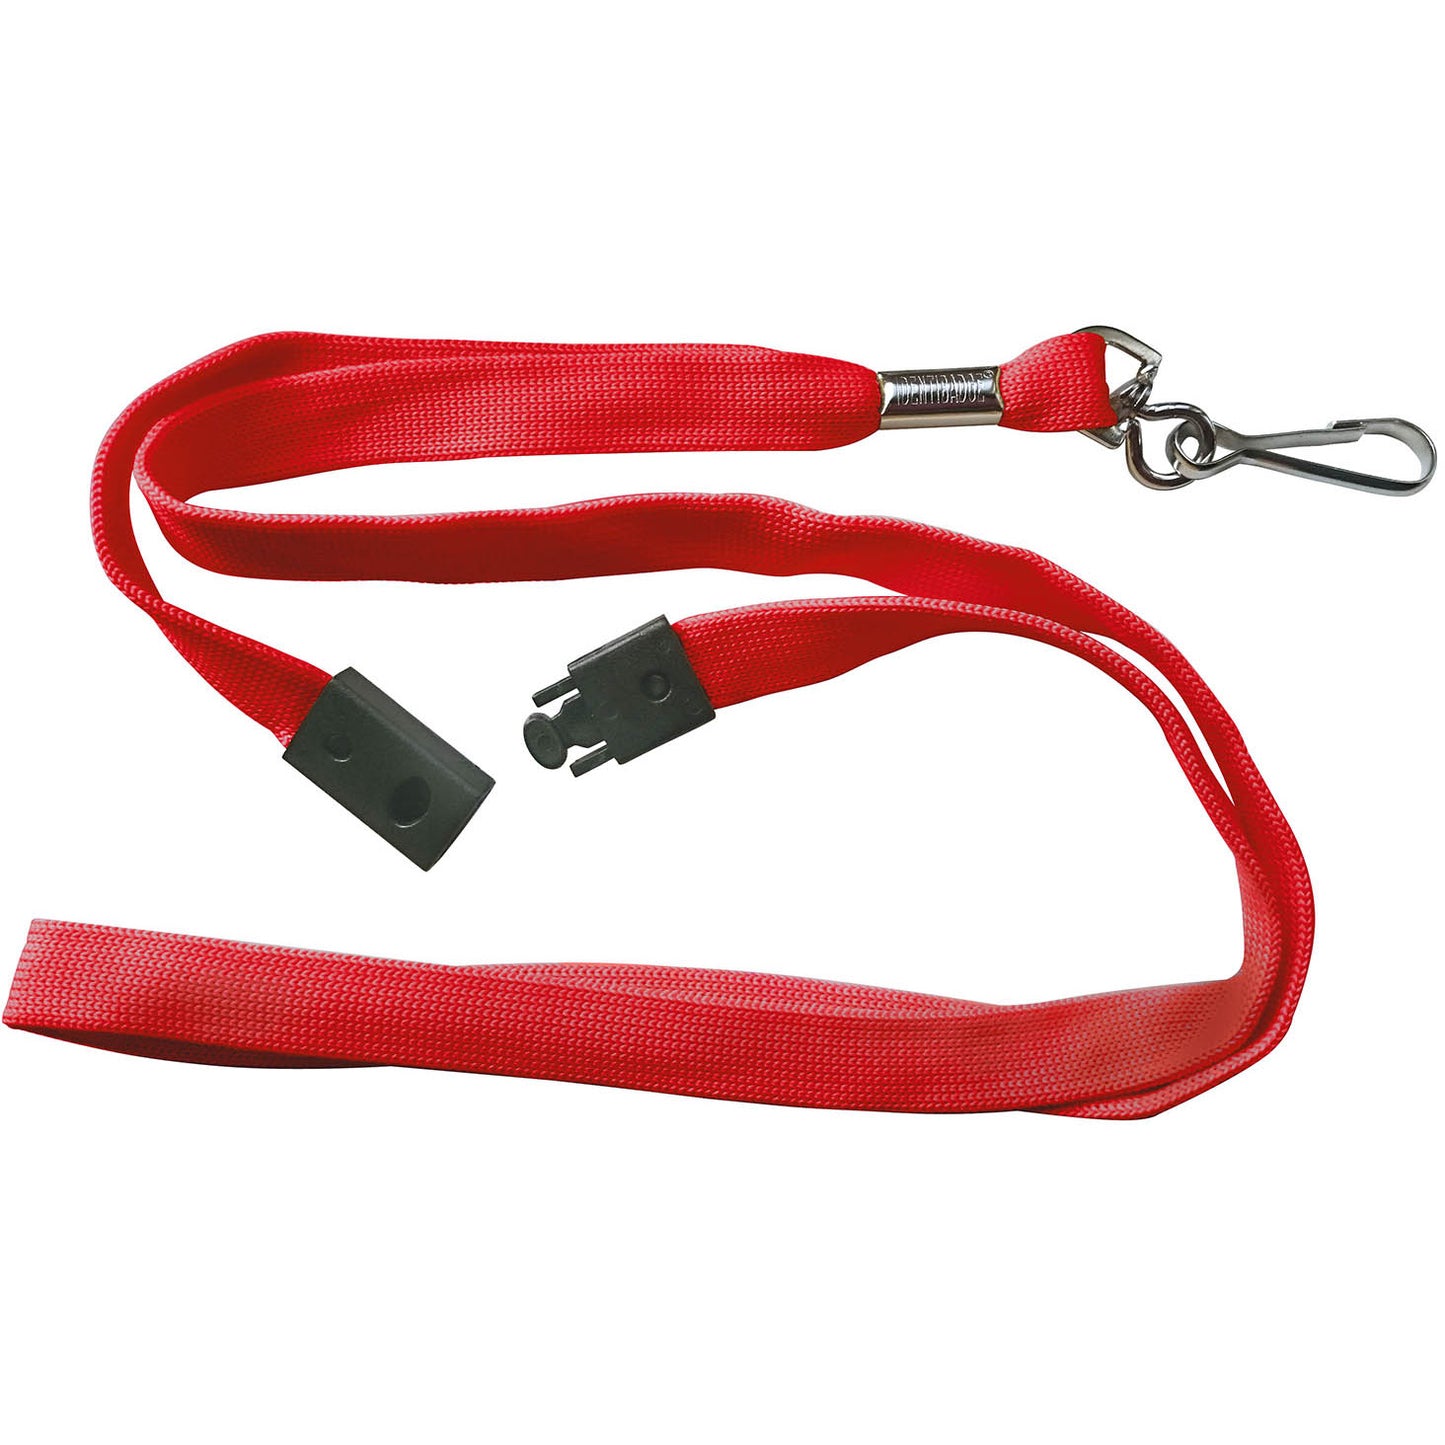 Lanyards - Flat Woven - Pack of 50